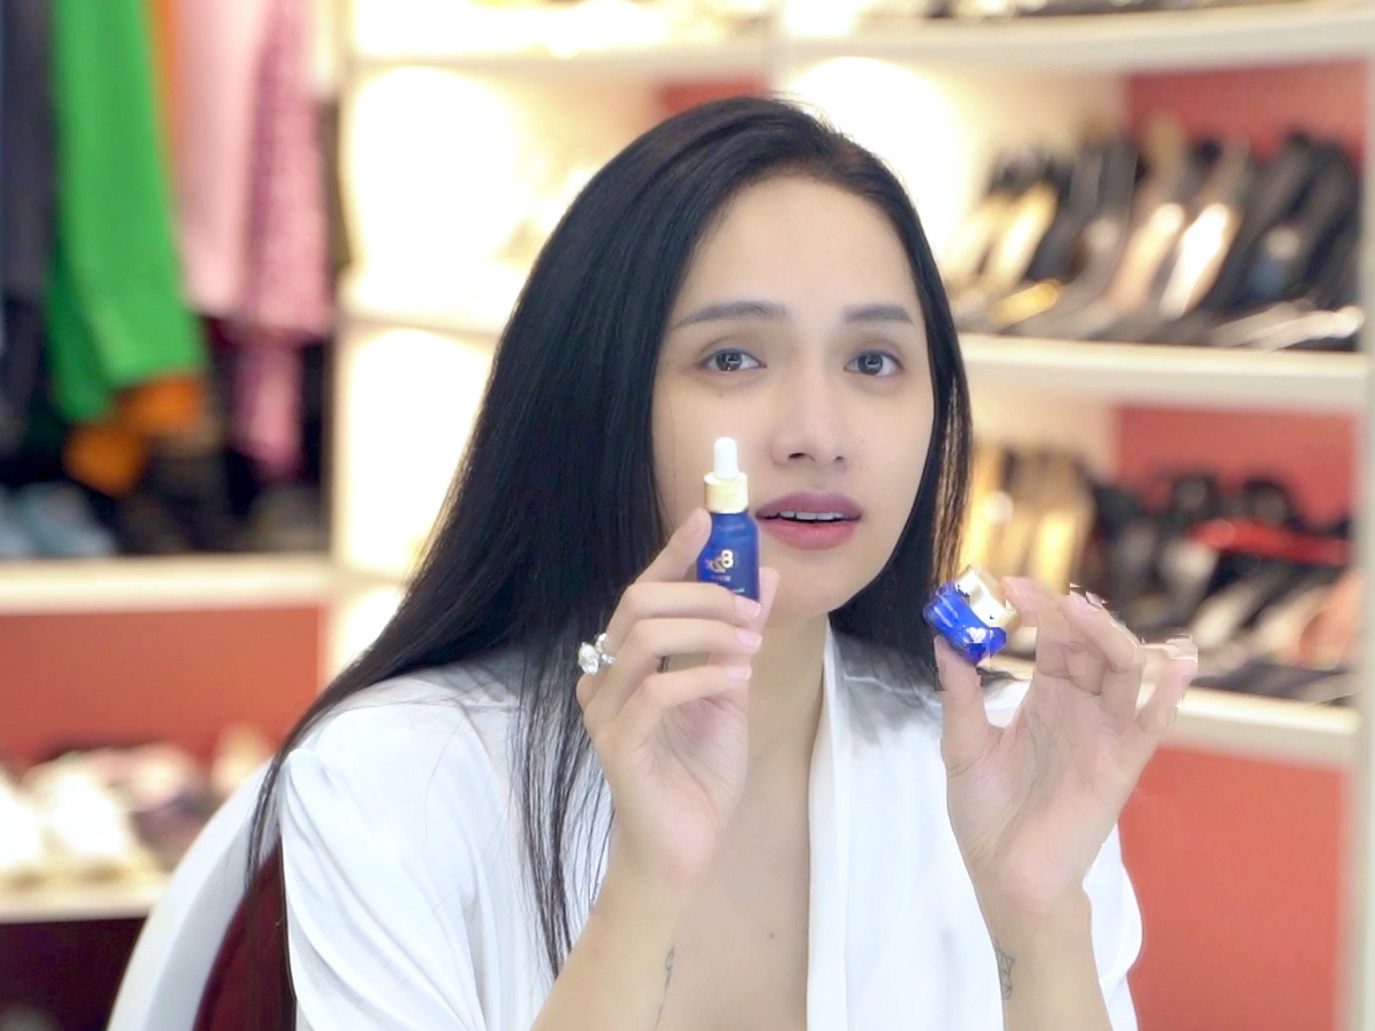 Paying for a million-dollar serum for a mask: Huong Giang makes showbiz 